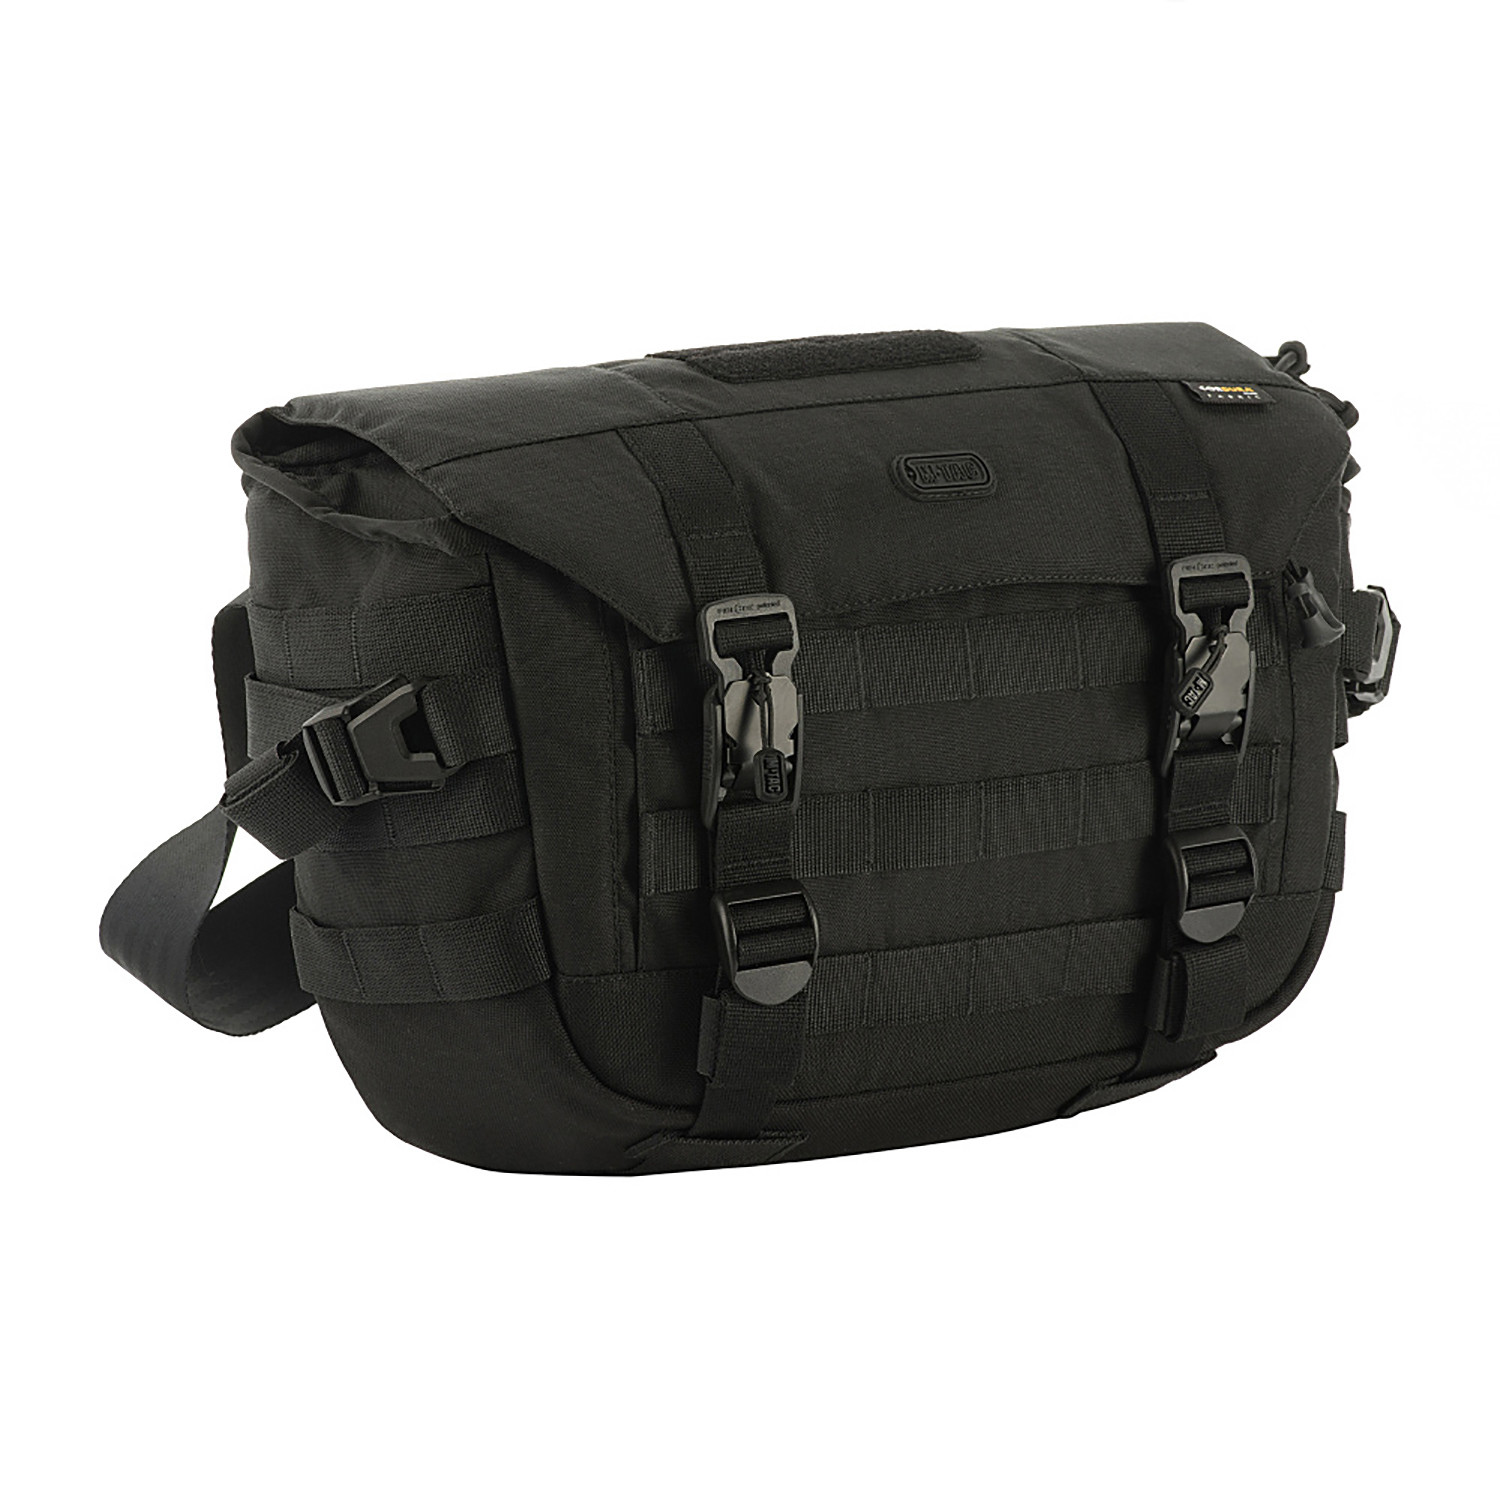 Cannes Bag // Black - M-Tac - Touch of Modern